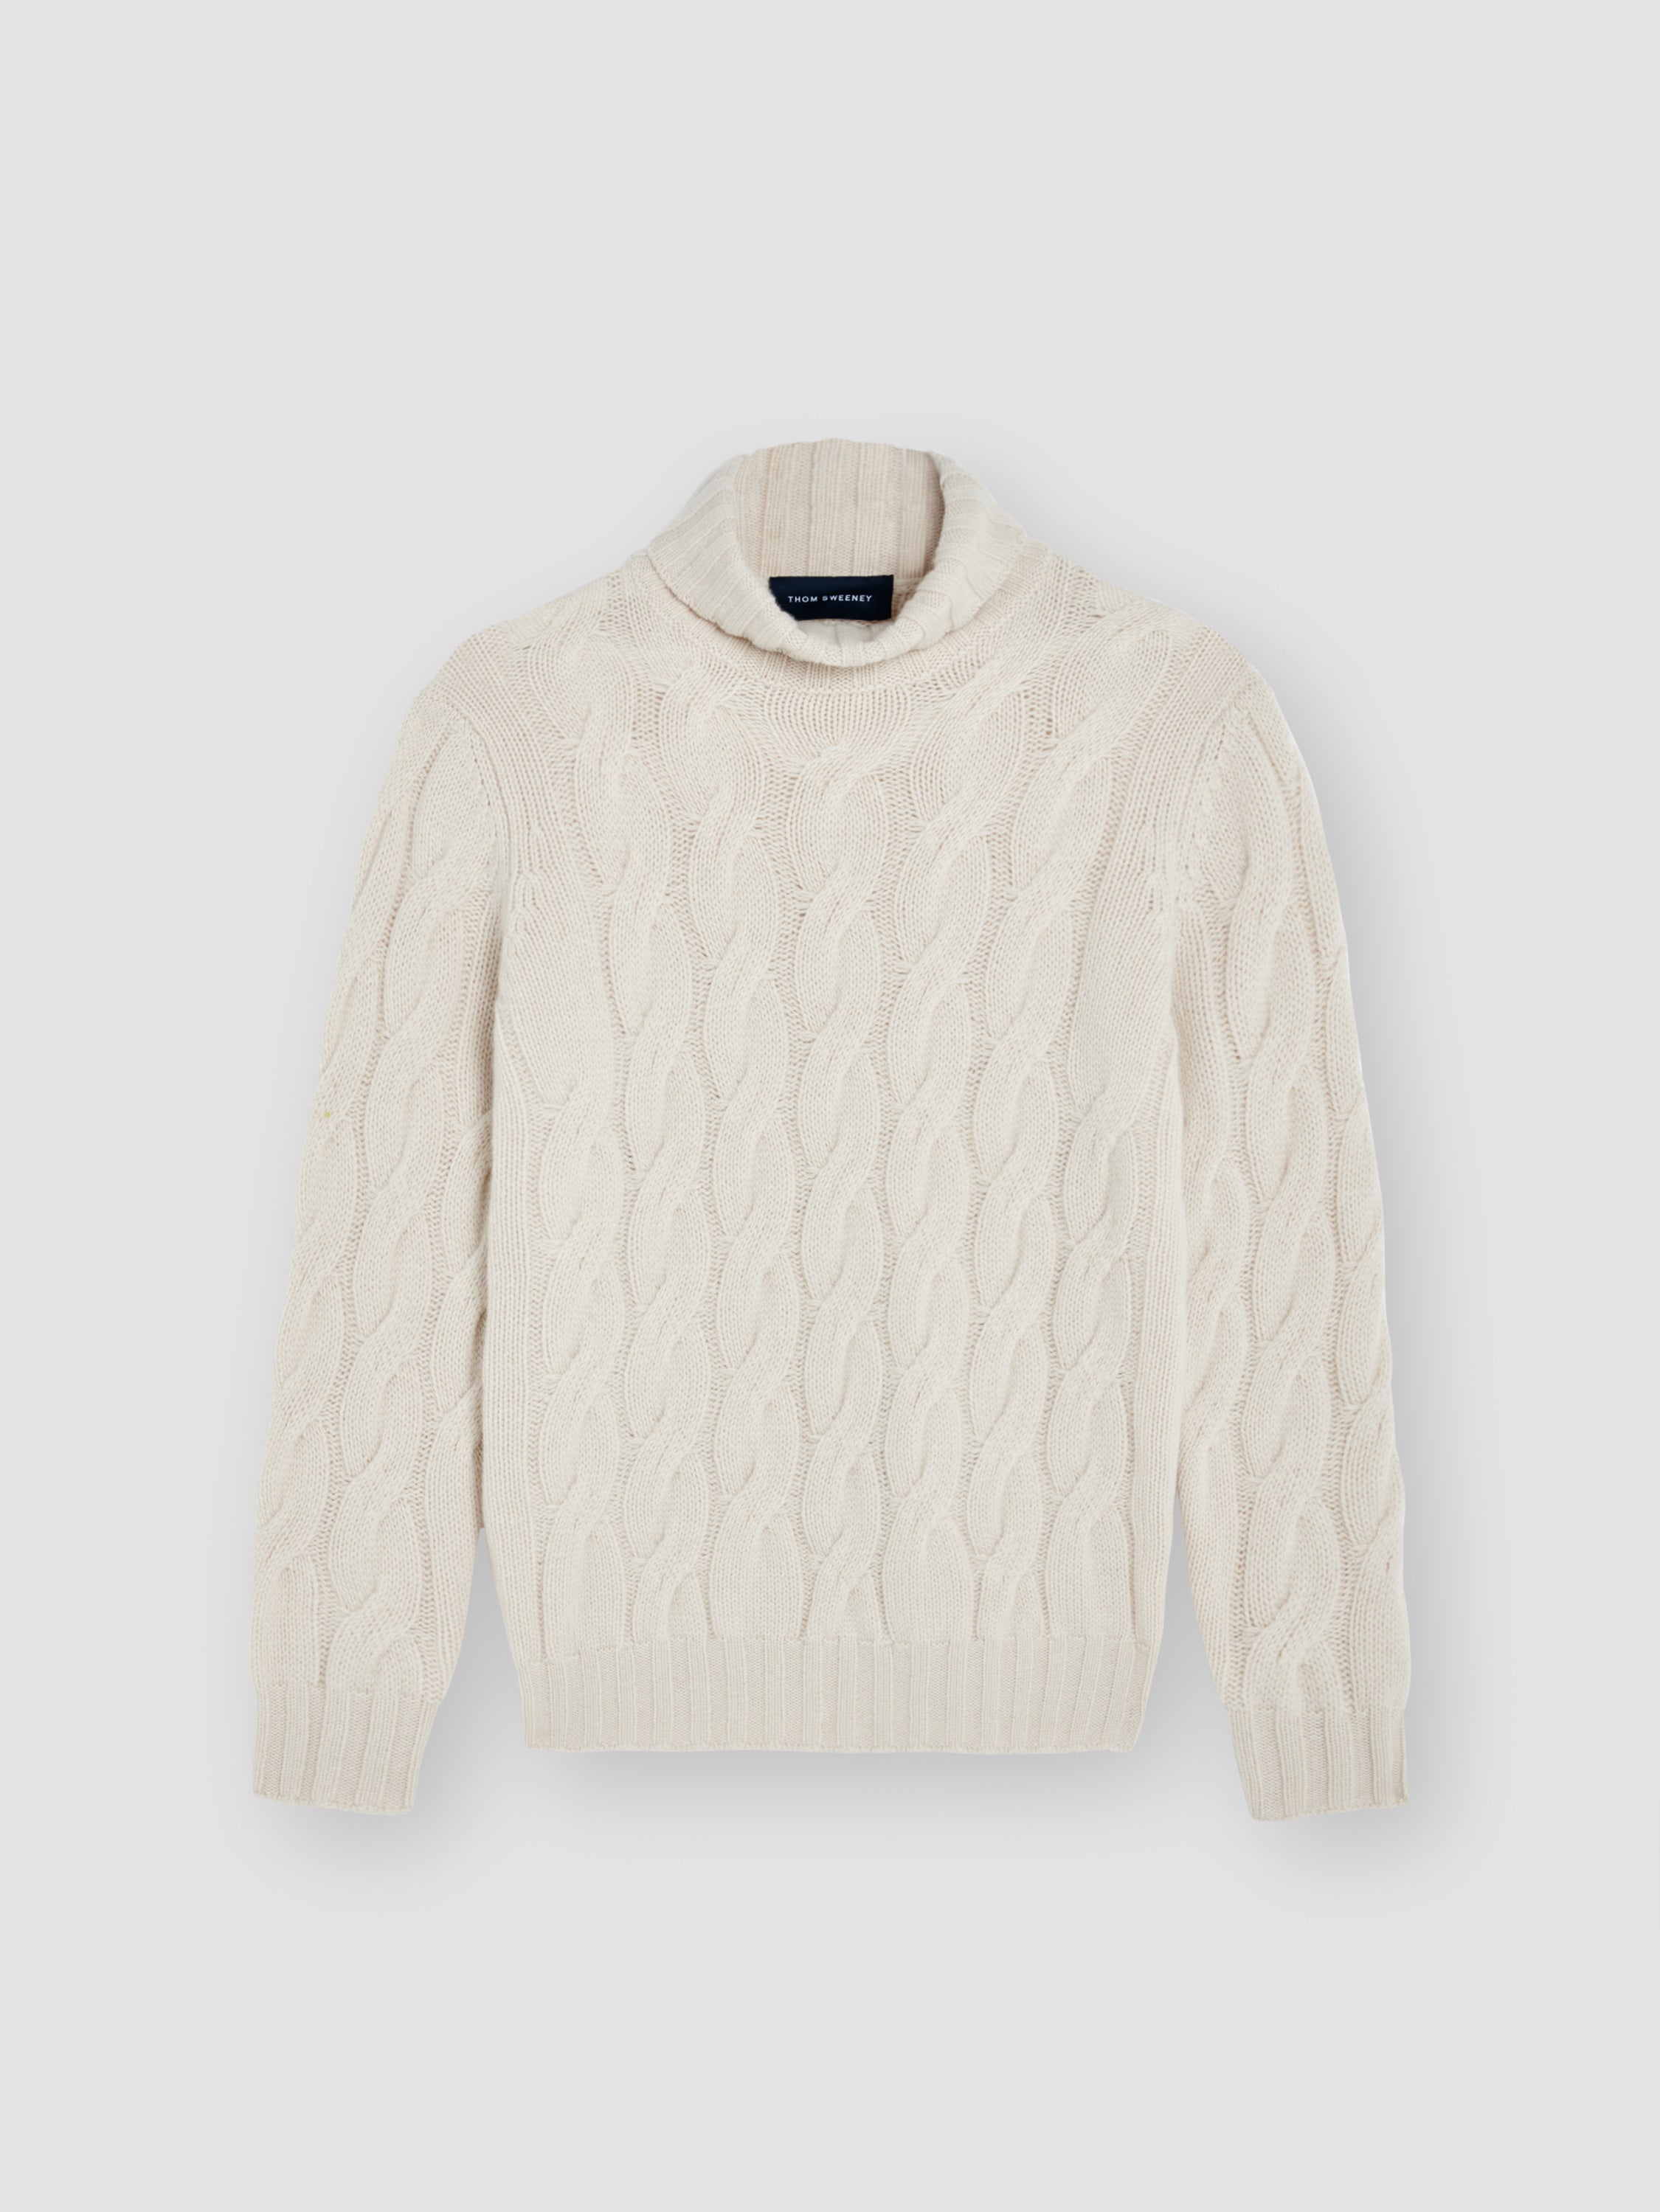 Chunky Cashmere Cable Knit Sweater Off-White Product Image